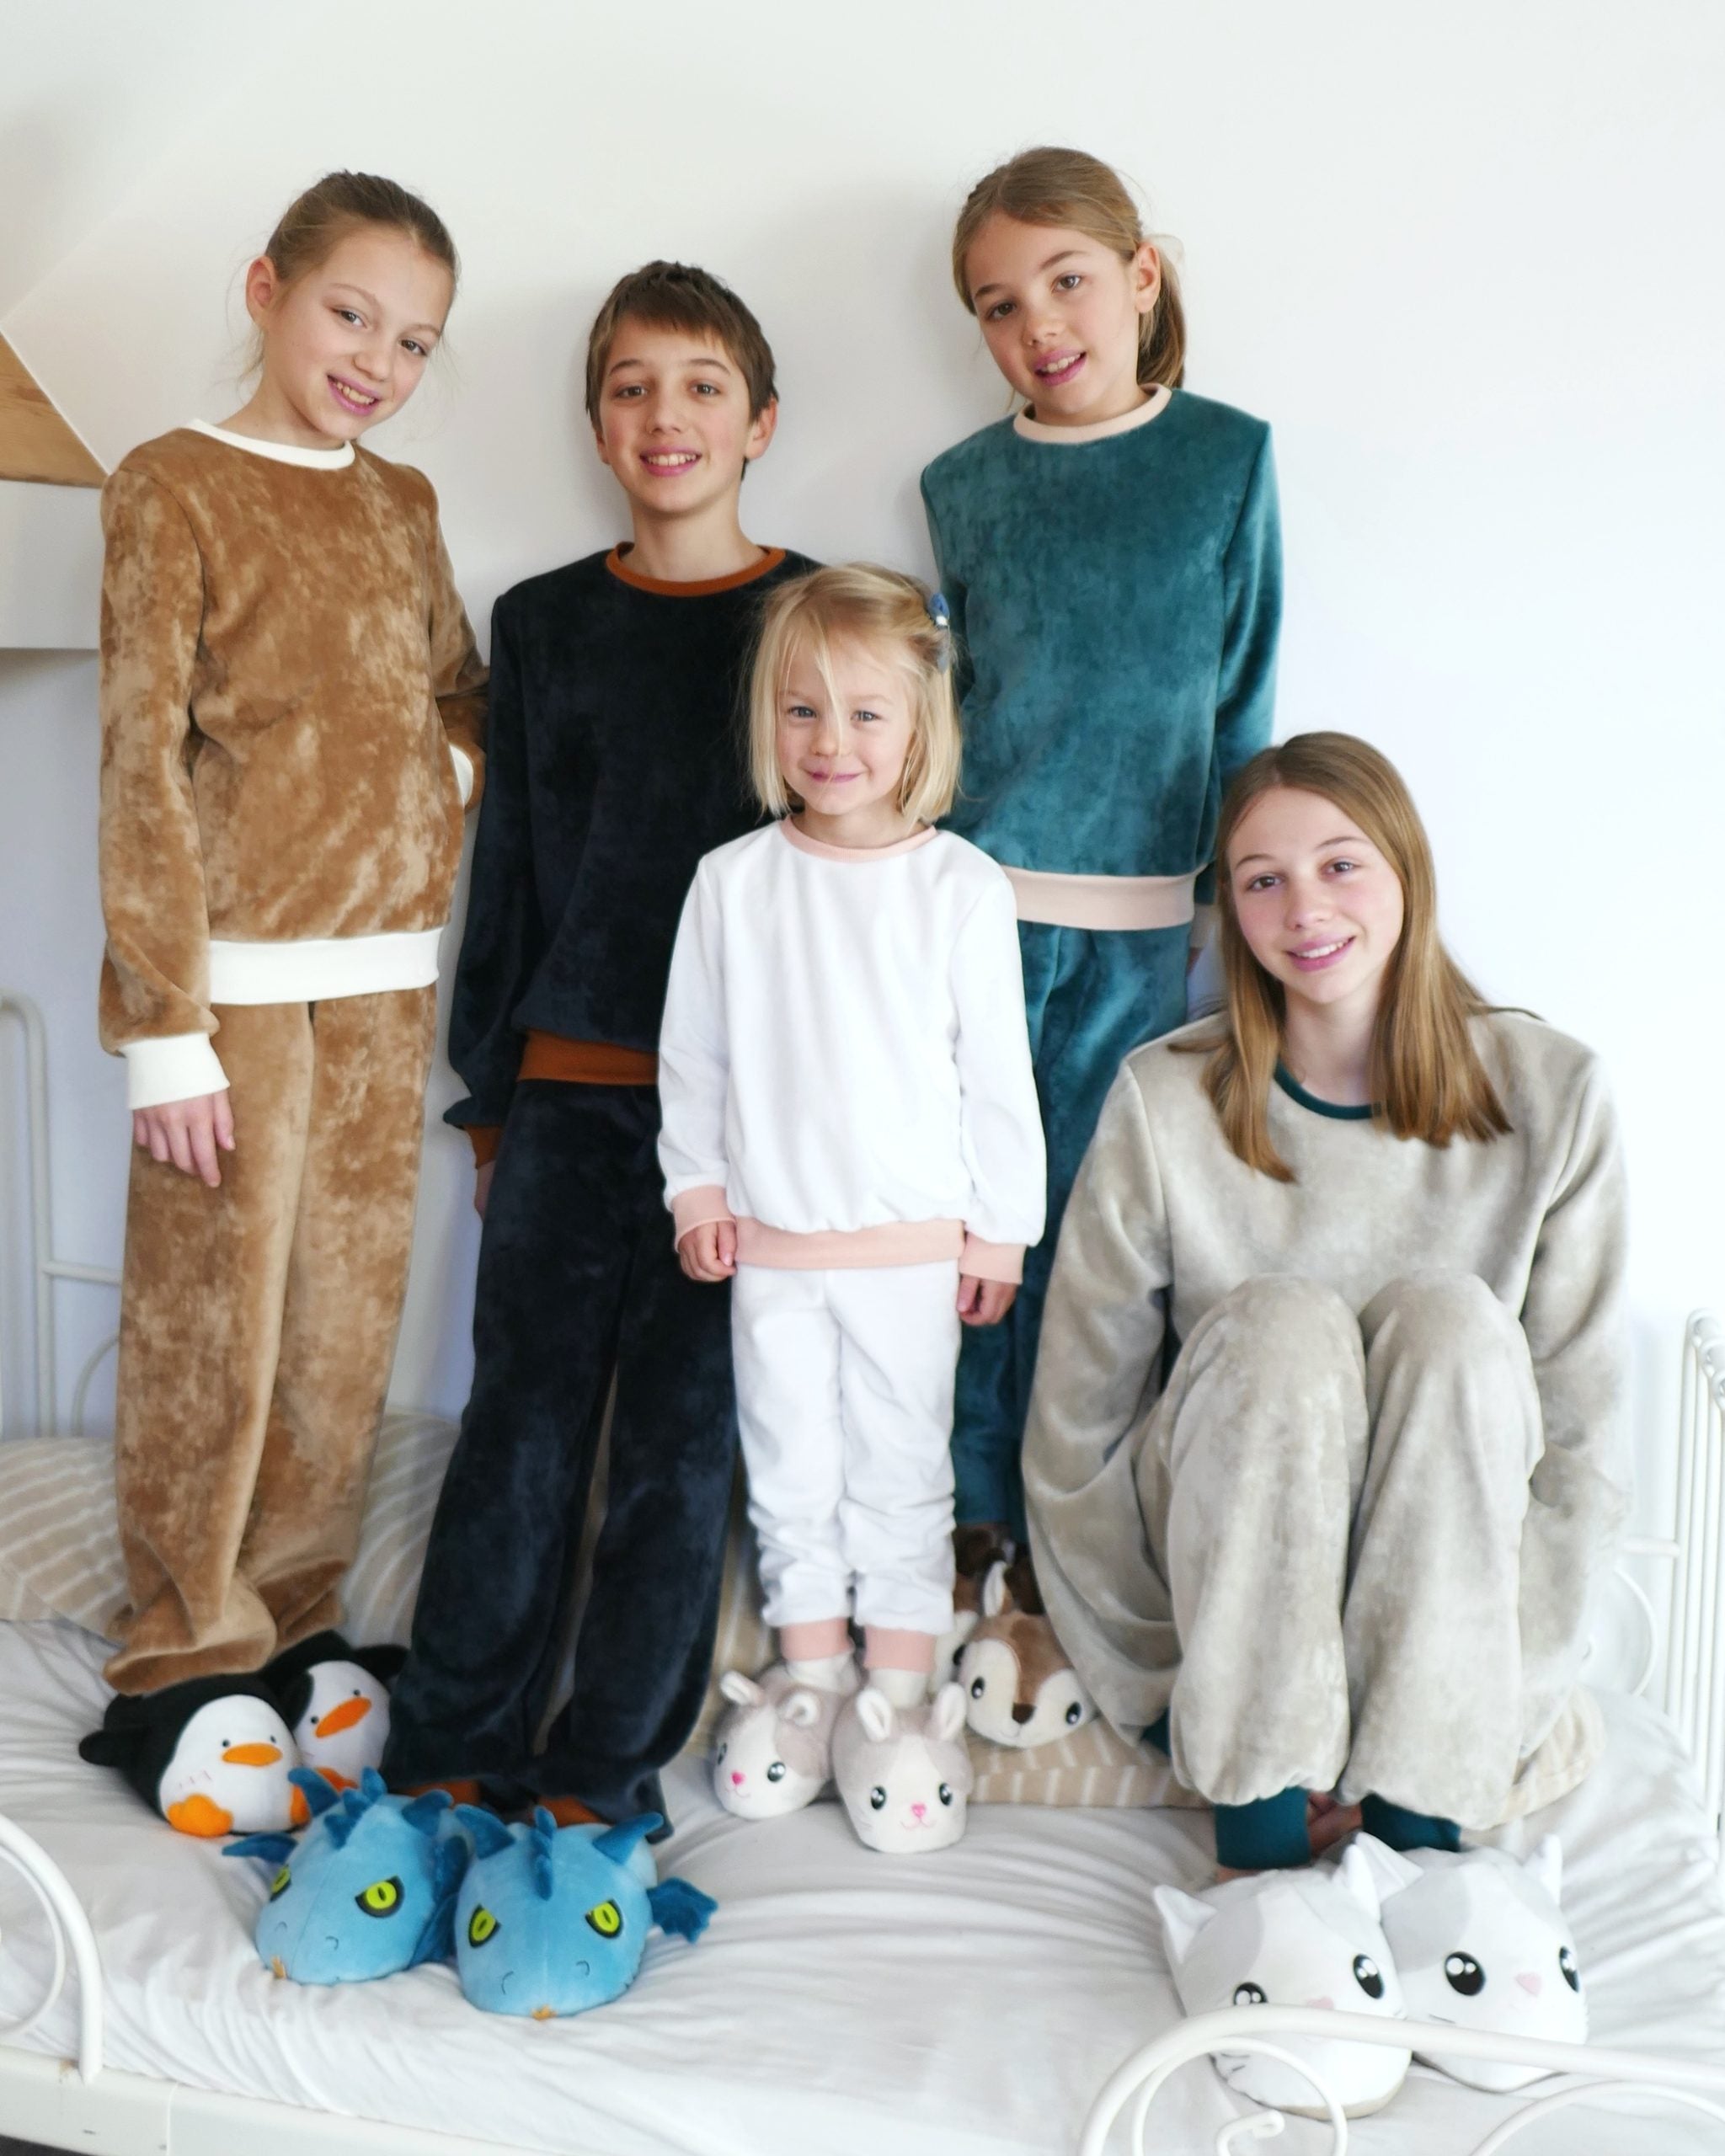 Children wearing the Child/Teen Pilou Pyjamas sewing pattern from Petits D'om on The Fold Line. A pyjamas pattern made in sweatshirt or jersey fabrics, featuring a bottom with a straight cut, elasticated waist, and ribbed hem bands. Top is relaxed fitting